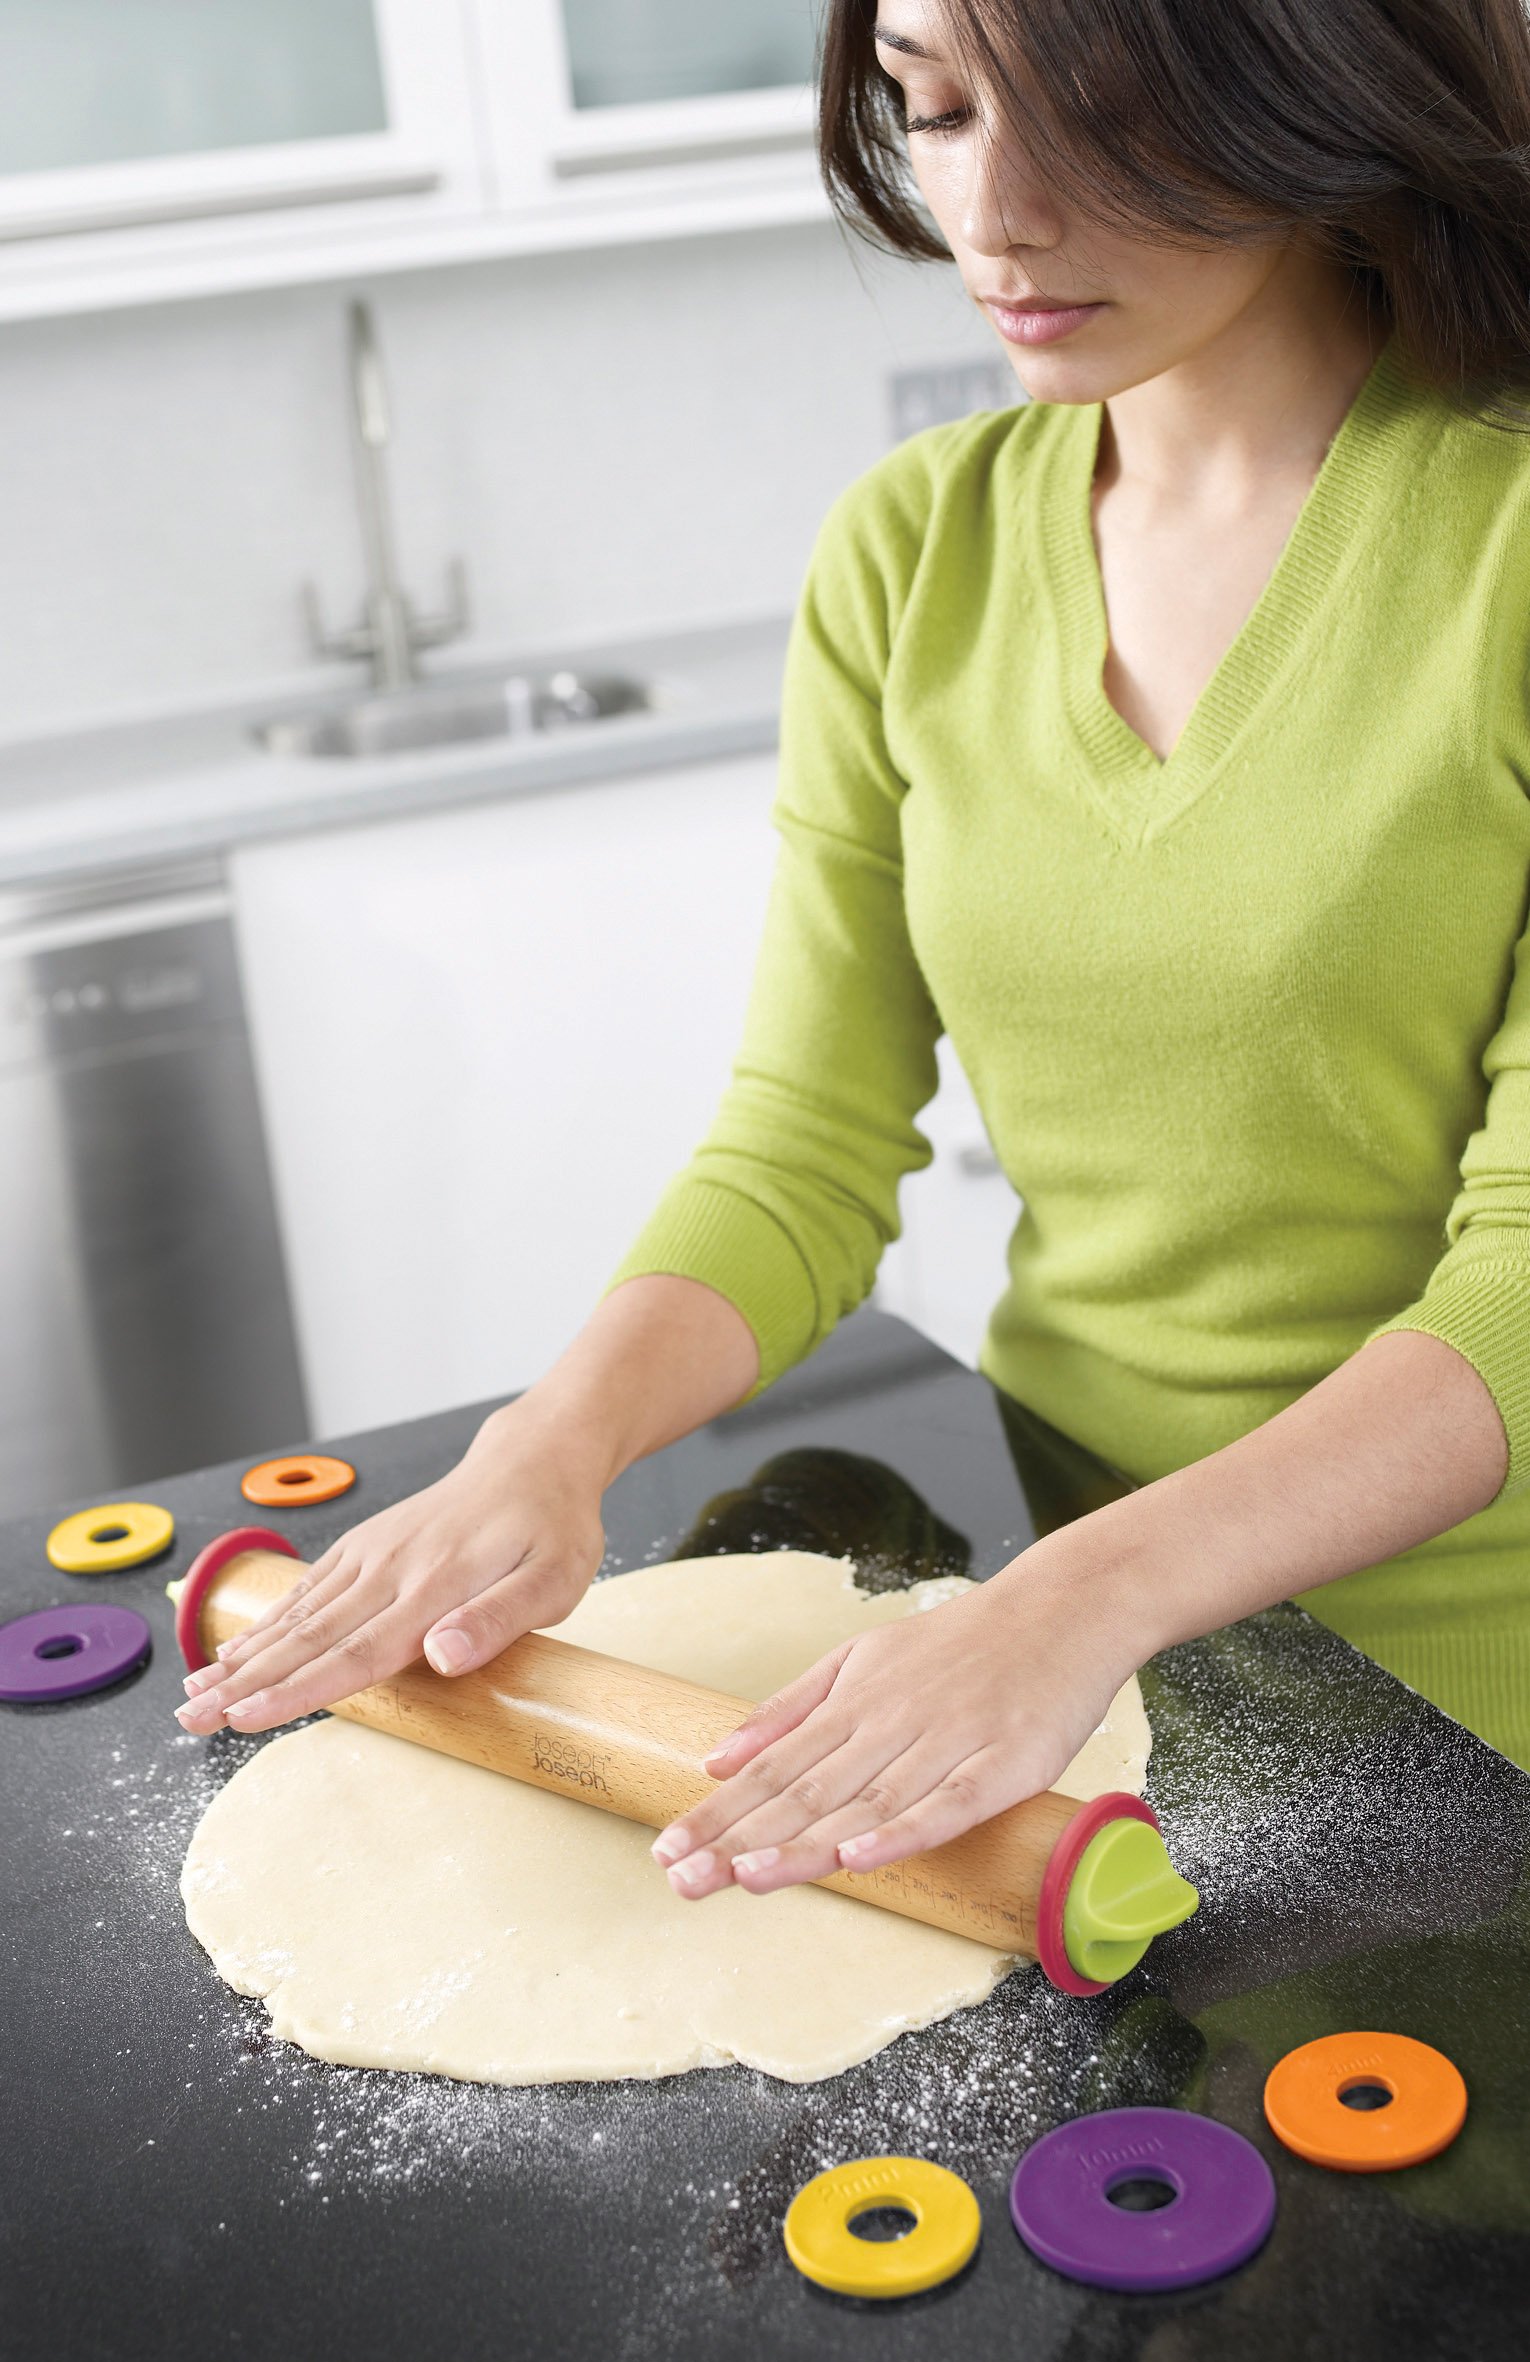 Joseph Joseph Adjustable Rolling Pin with Removable Rings, 13.6